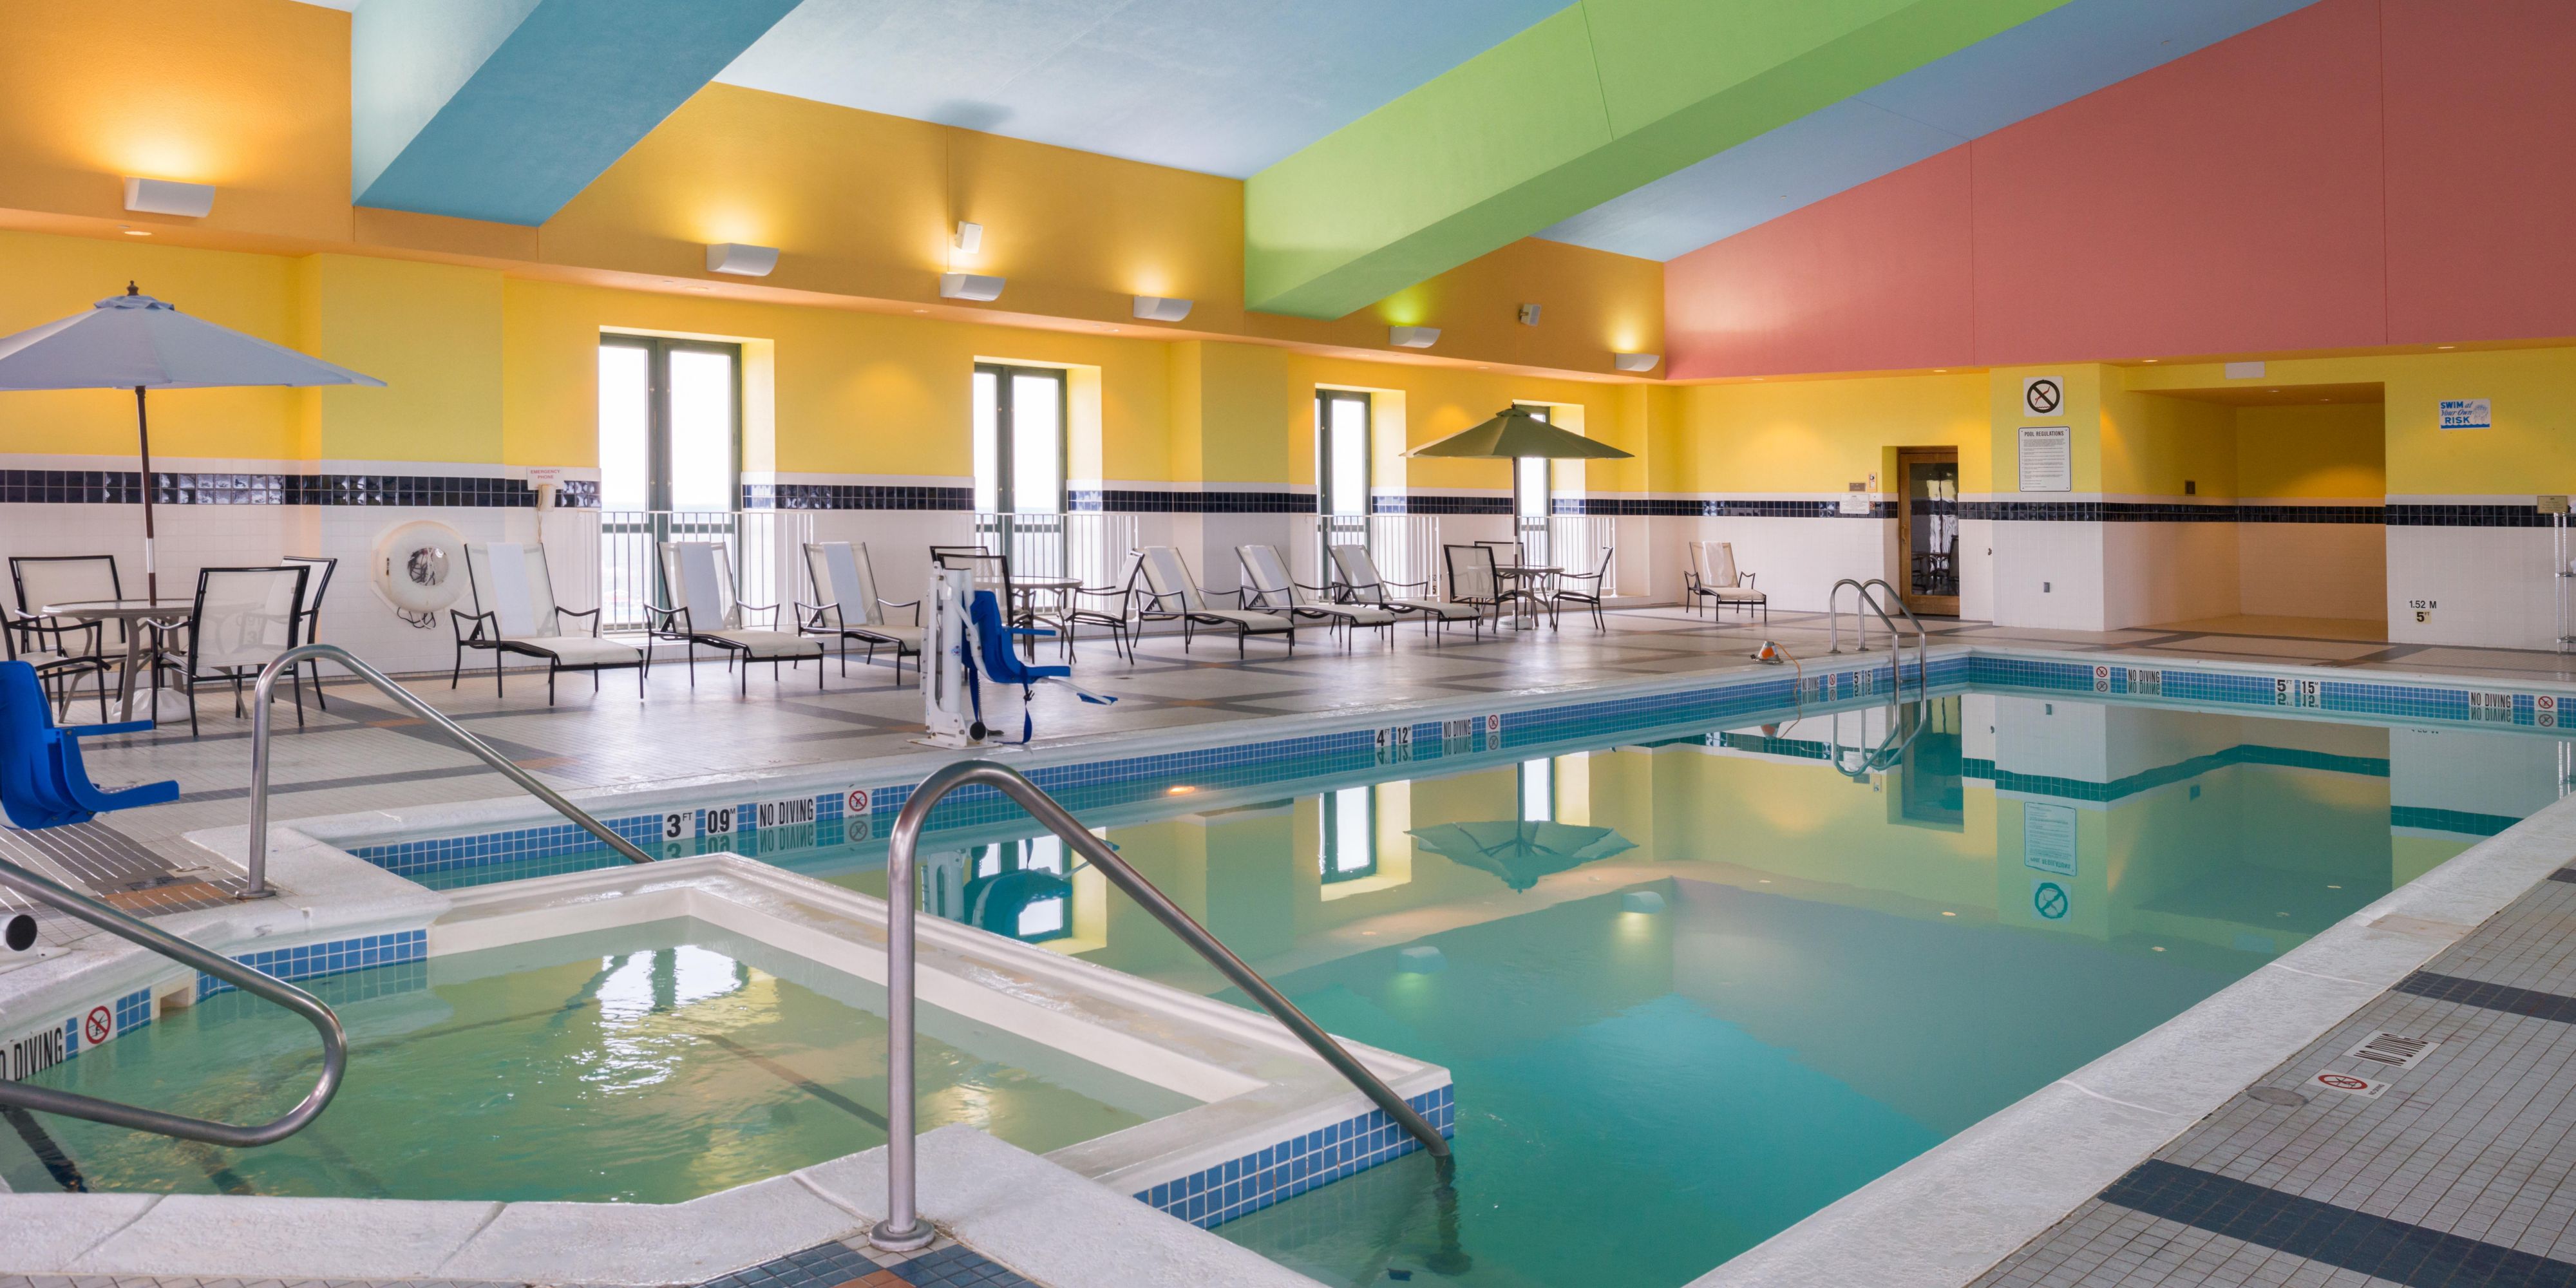 Our valued guests are granted access to the indoor pool and sauna at our sister property the Crowne Plaza, located just steps away. Pool hours: 6:00 AM - 11:00 PM.